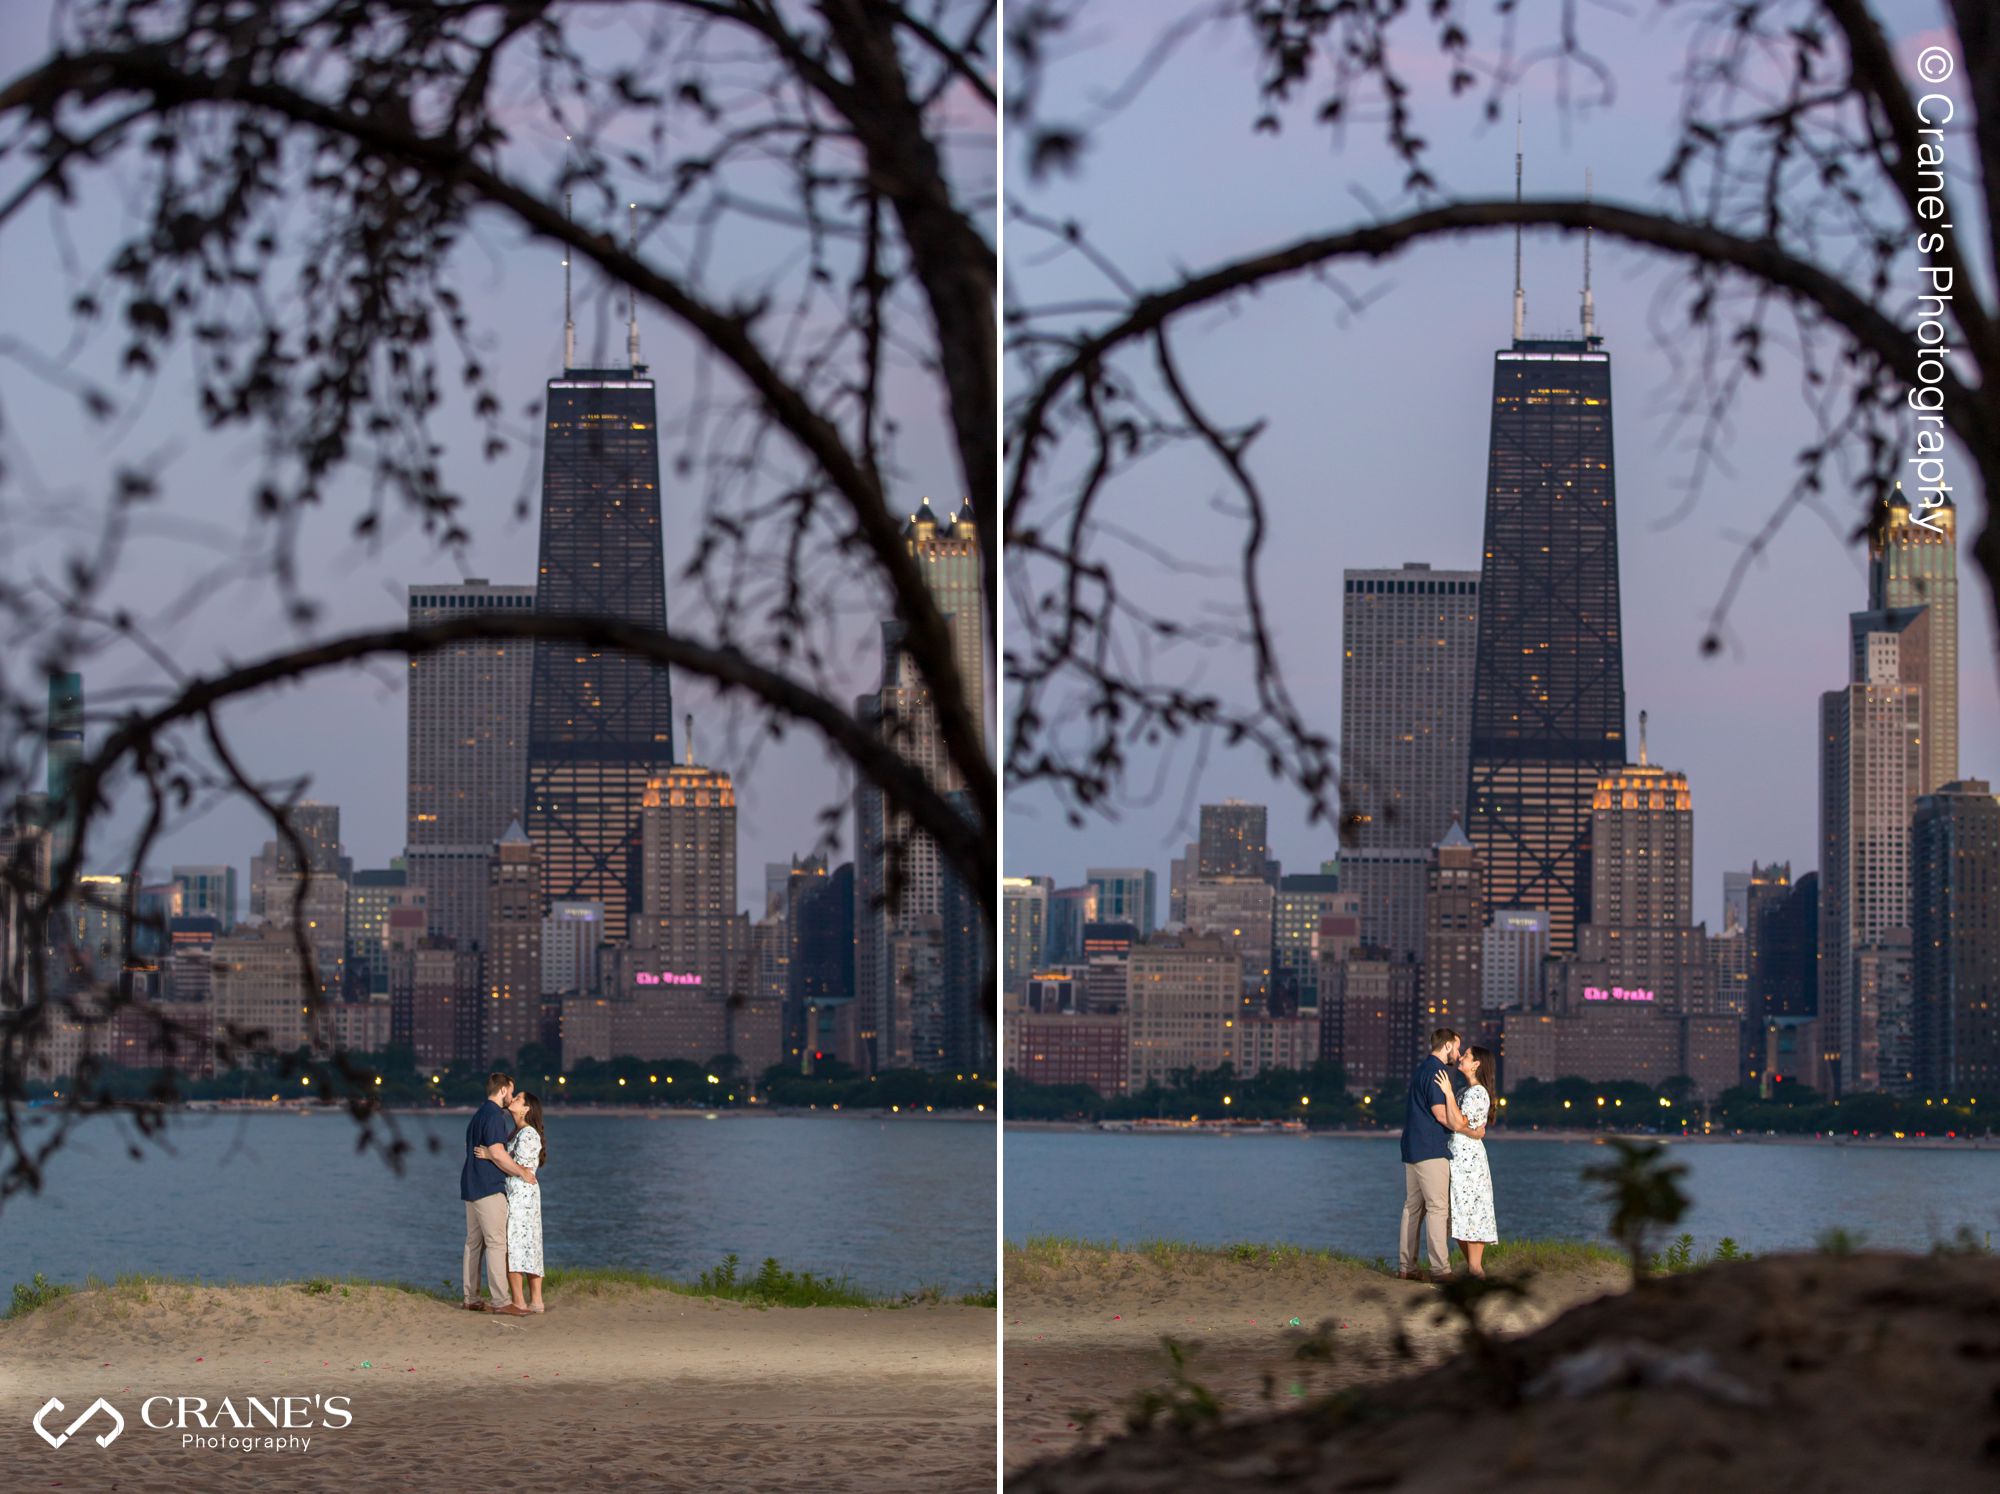 A composite image of a couple kissing at night with the skyline of Chicago in the background